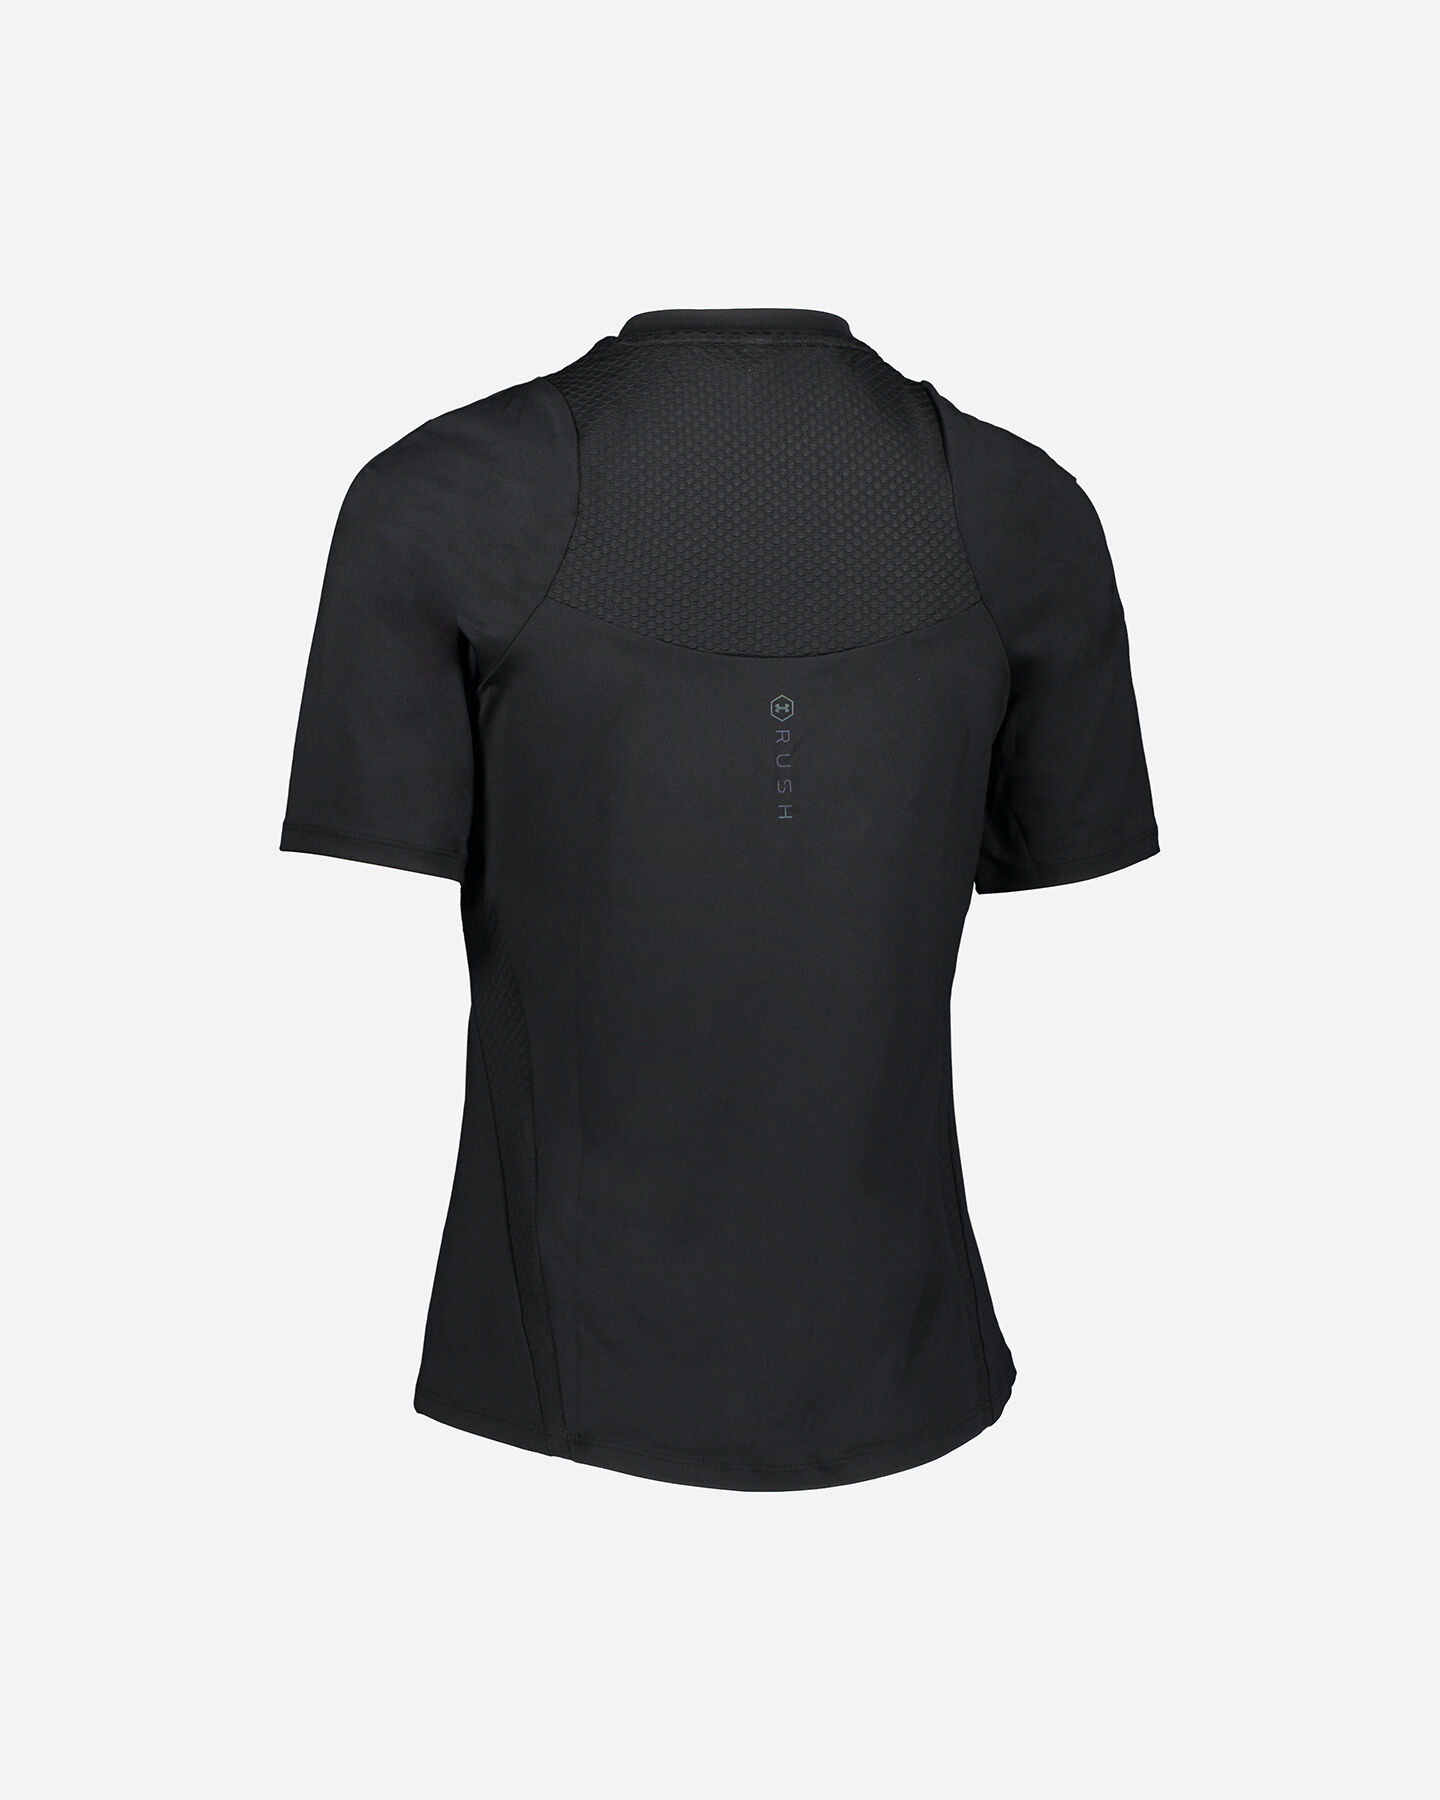  T-Shirt training UNDER ARMOUR POLY RUSH W S5169518|0001|XS scatto 1